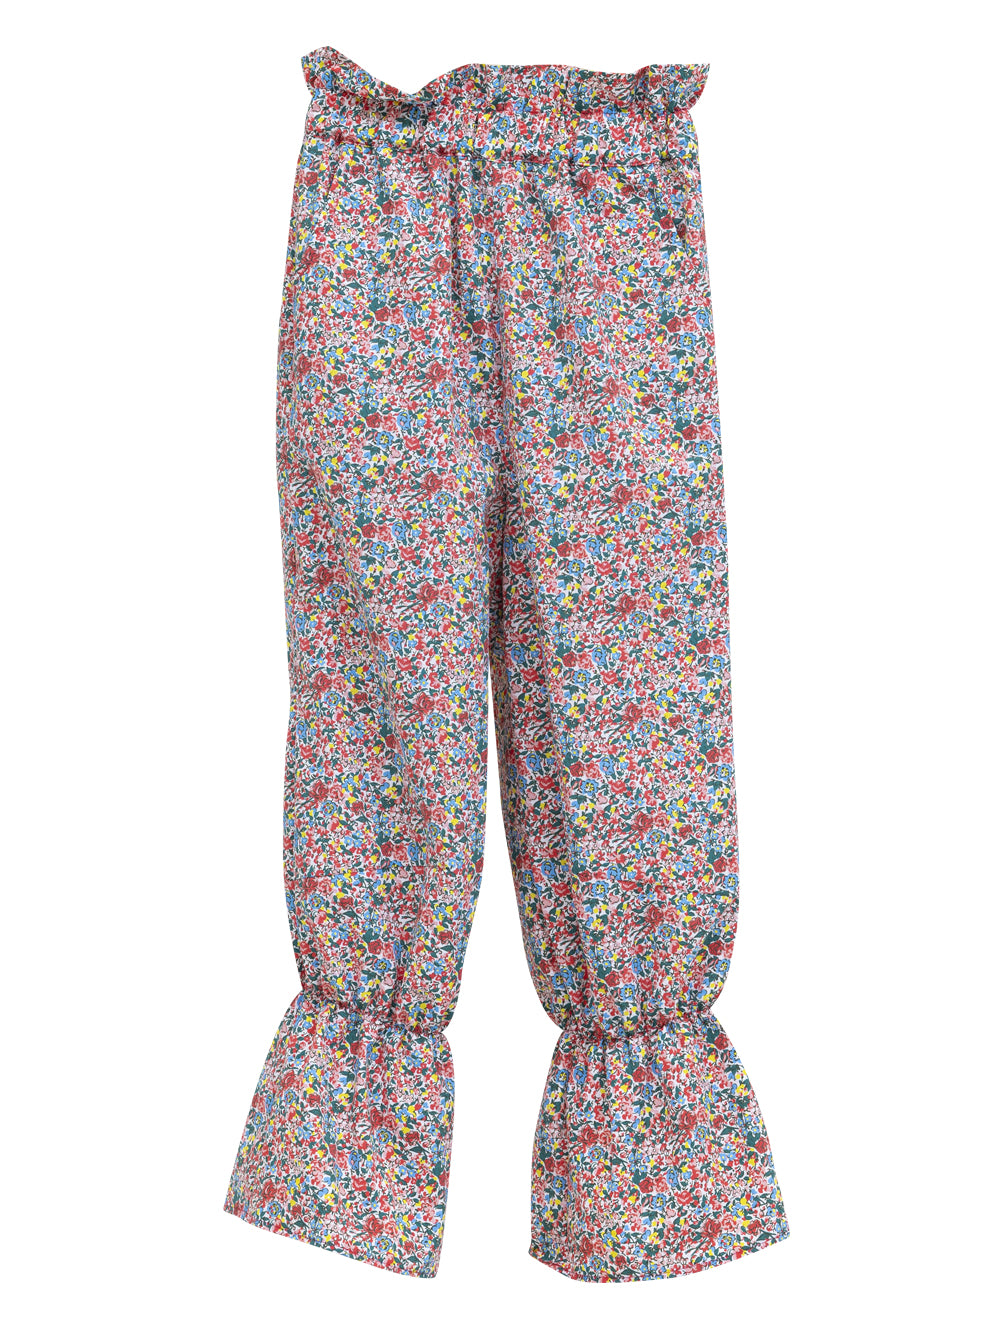 Moncler Ladies Floral Print Cropped Silk Trousers, Brand Size 42 (US Size  10) F10932A72000-A0117-090 - Apparel - Jomashop